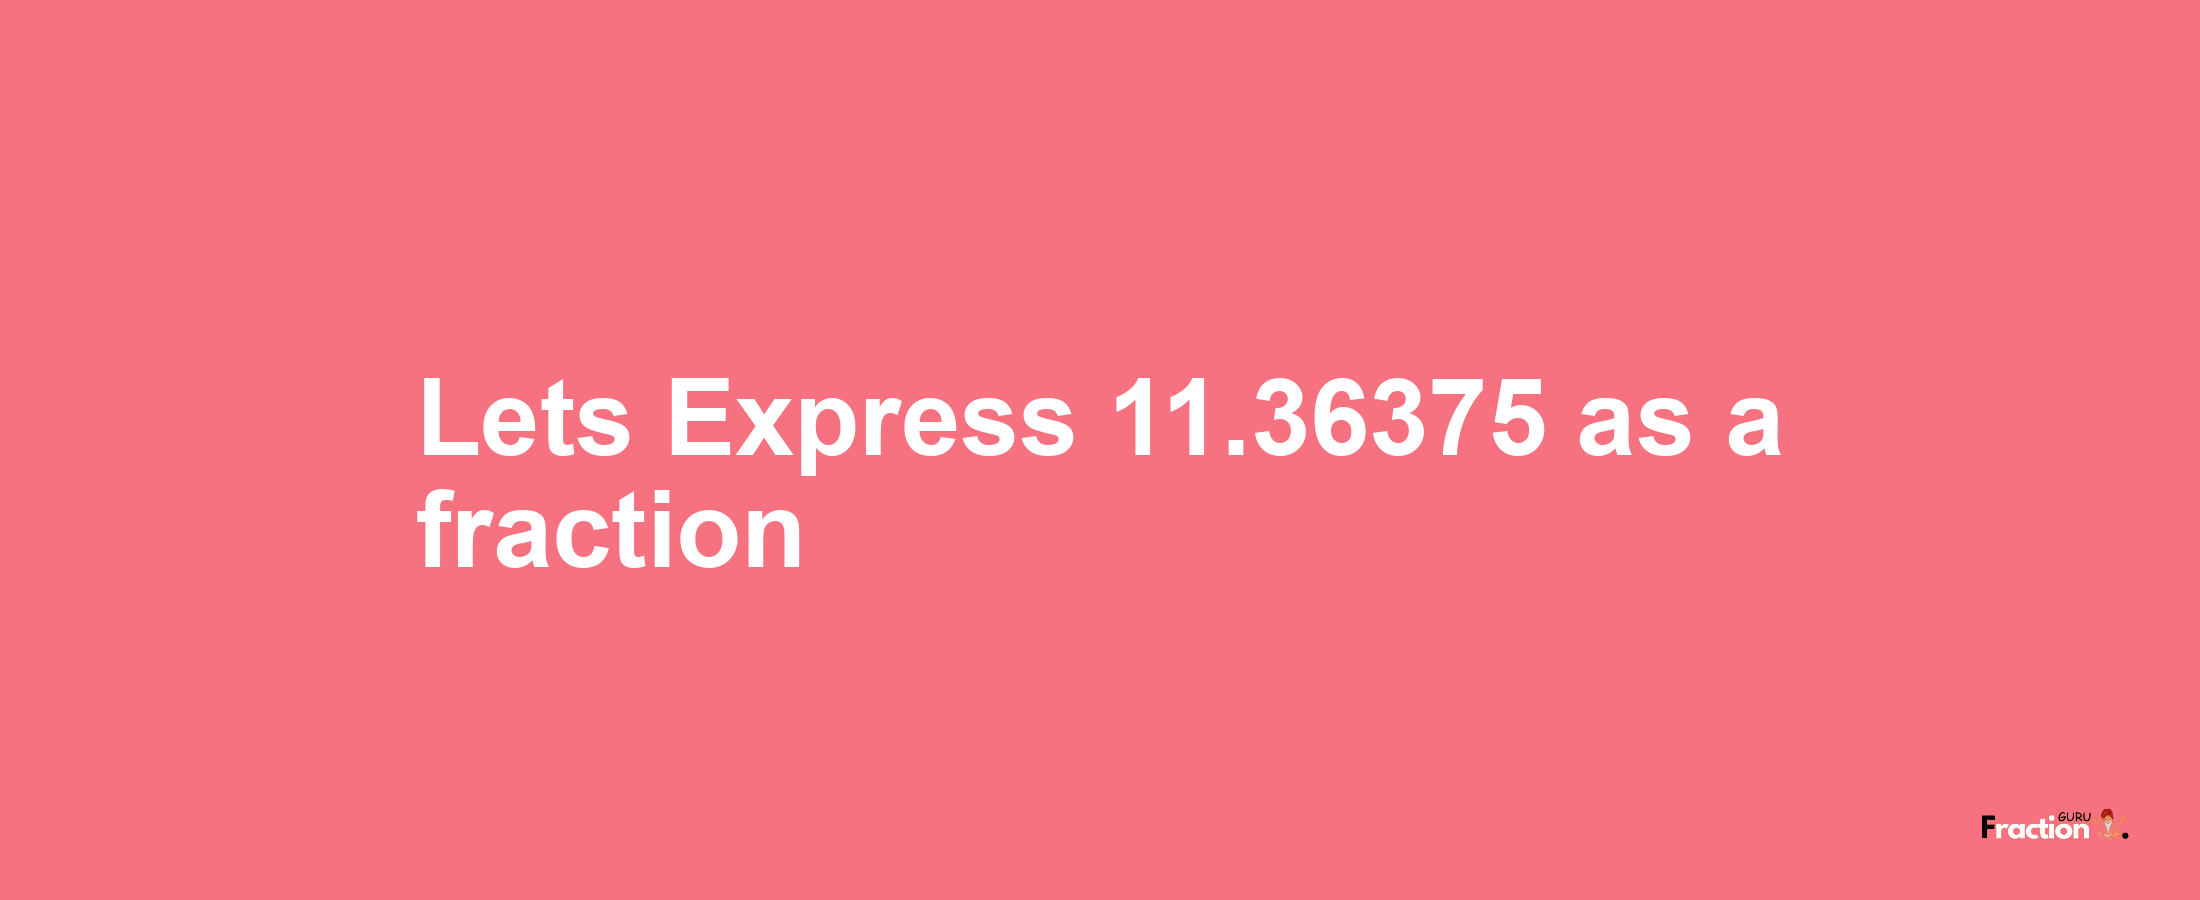 Lets Express 11.36375 as afraction